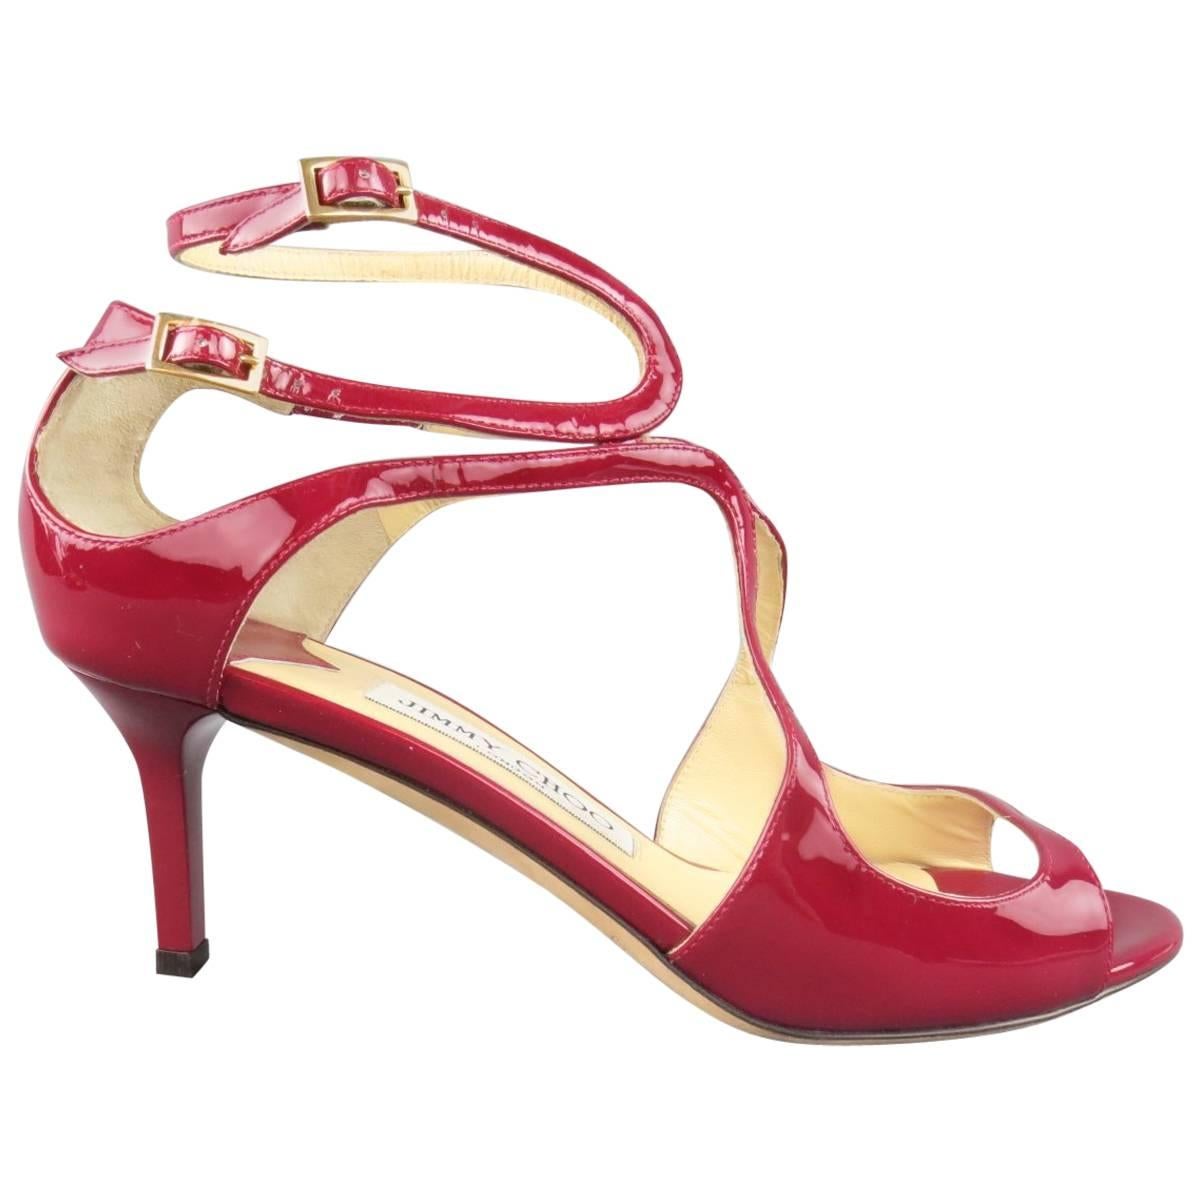 JIMMY CHOO Size 6 Burgundy Red Patent Leather Lang Strappy Sandals